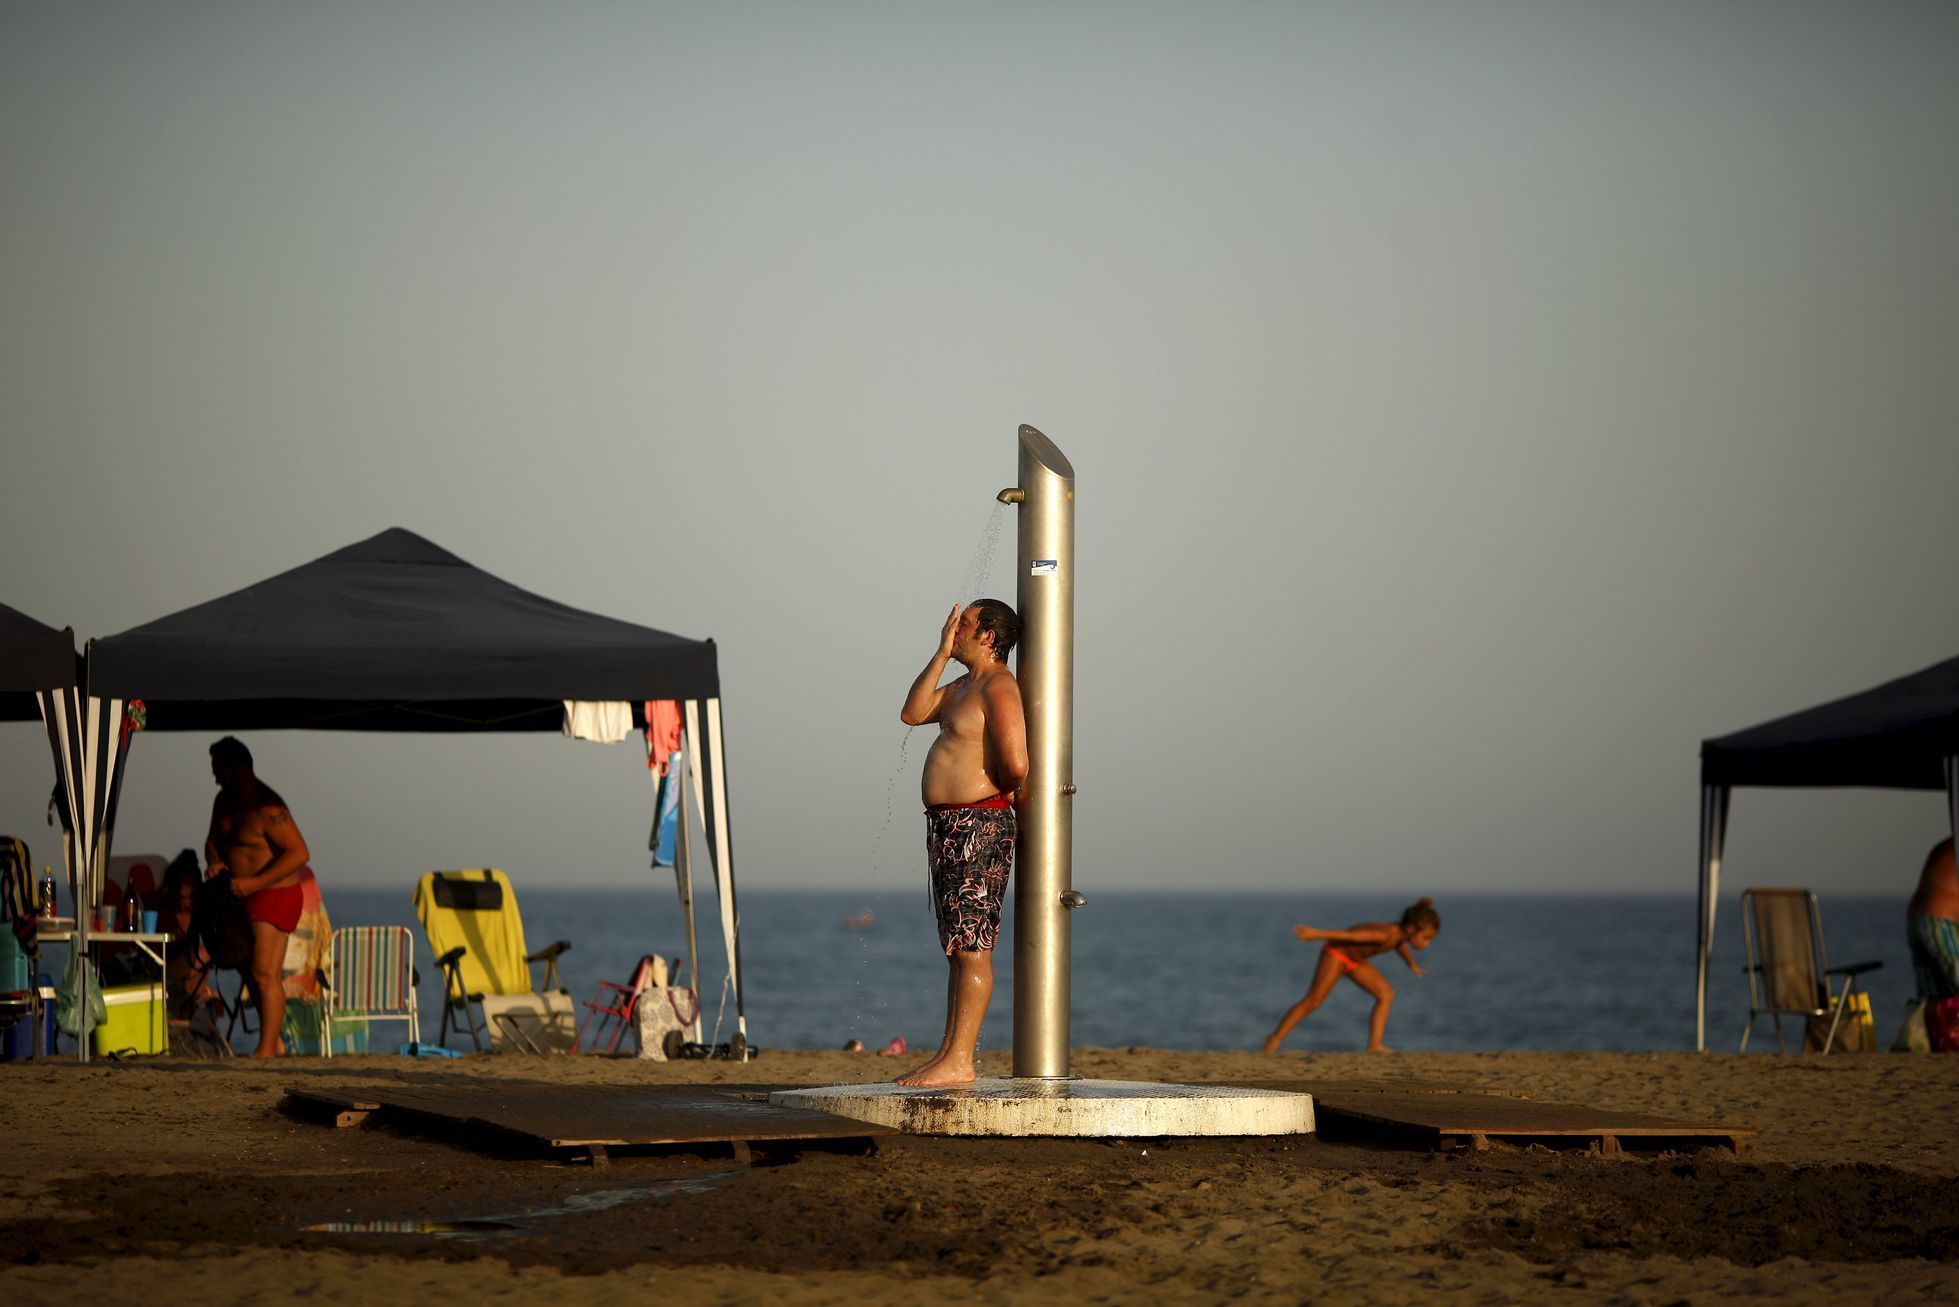 A man takes a shower during the second heat wave of the summer on Sacaba beach in Malaga